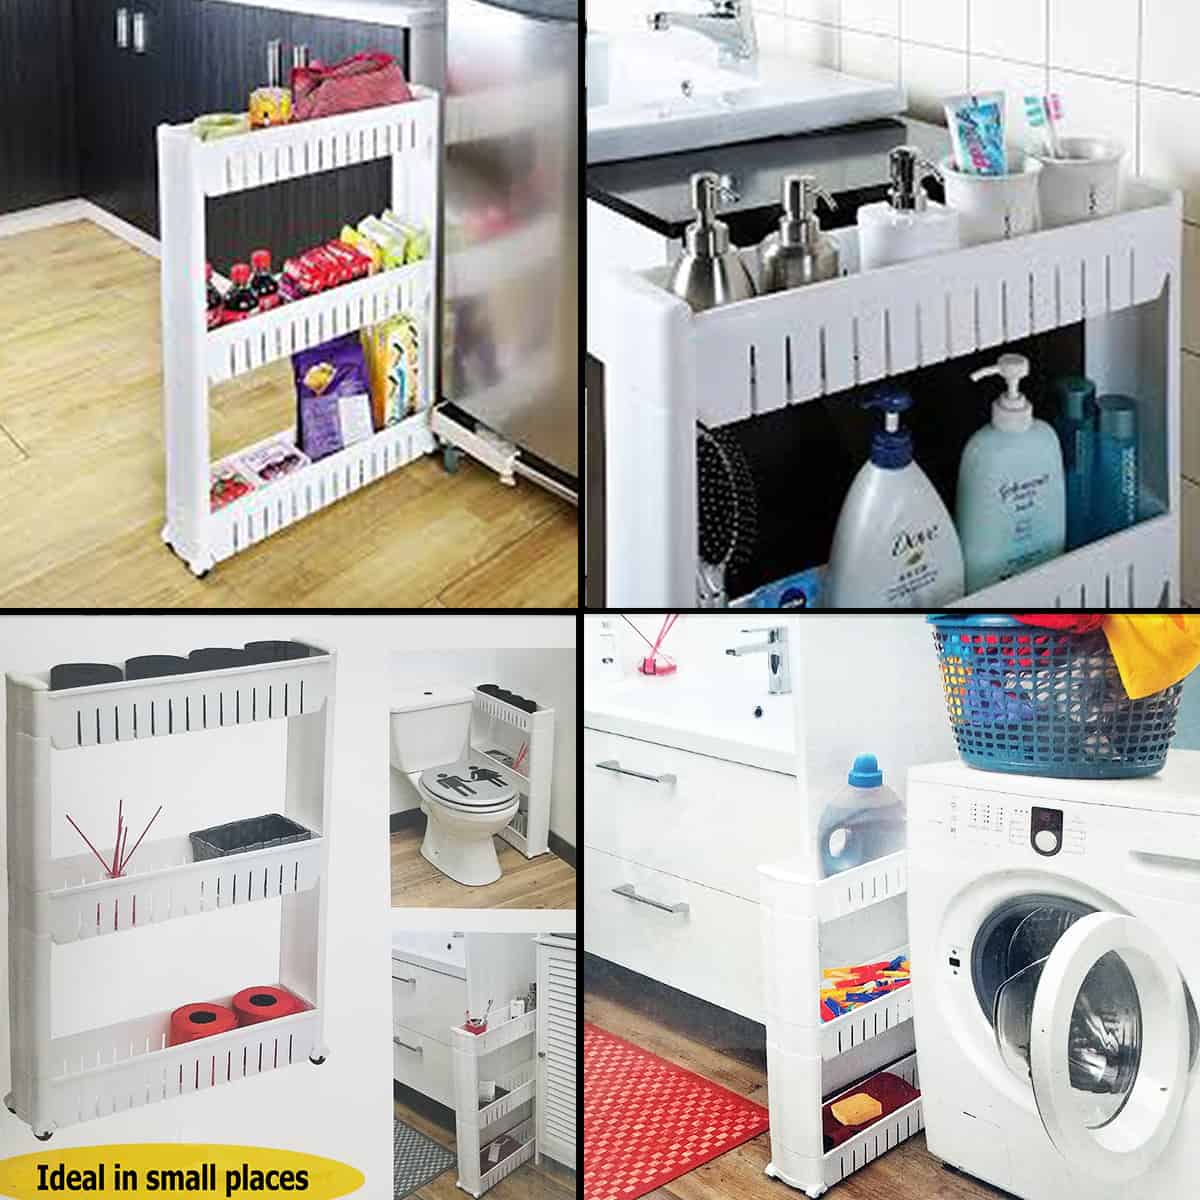 White 3-tier rolling utility cart in various home settings, showcasing its versatility and space-saving design for storage